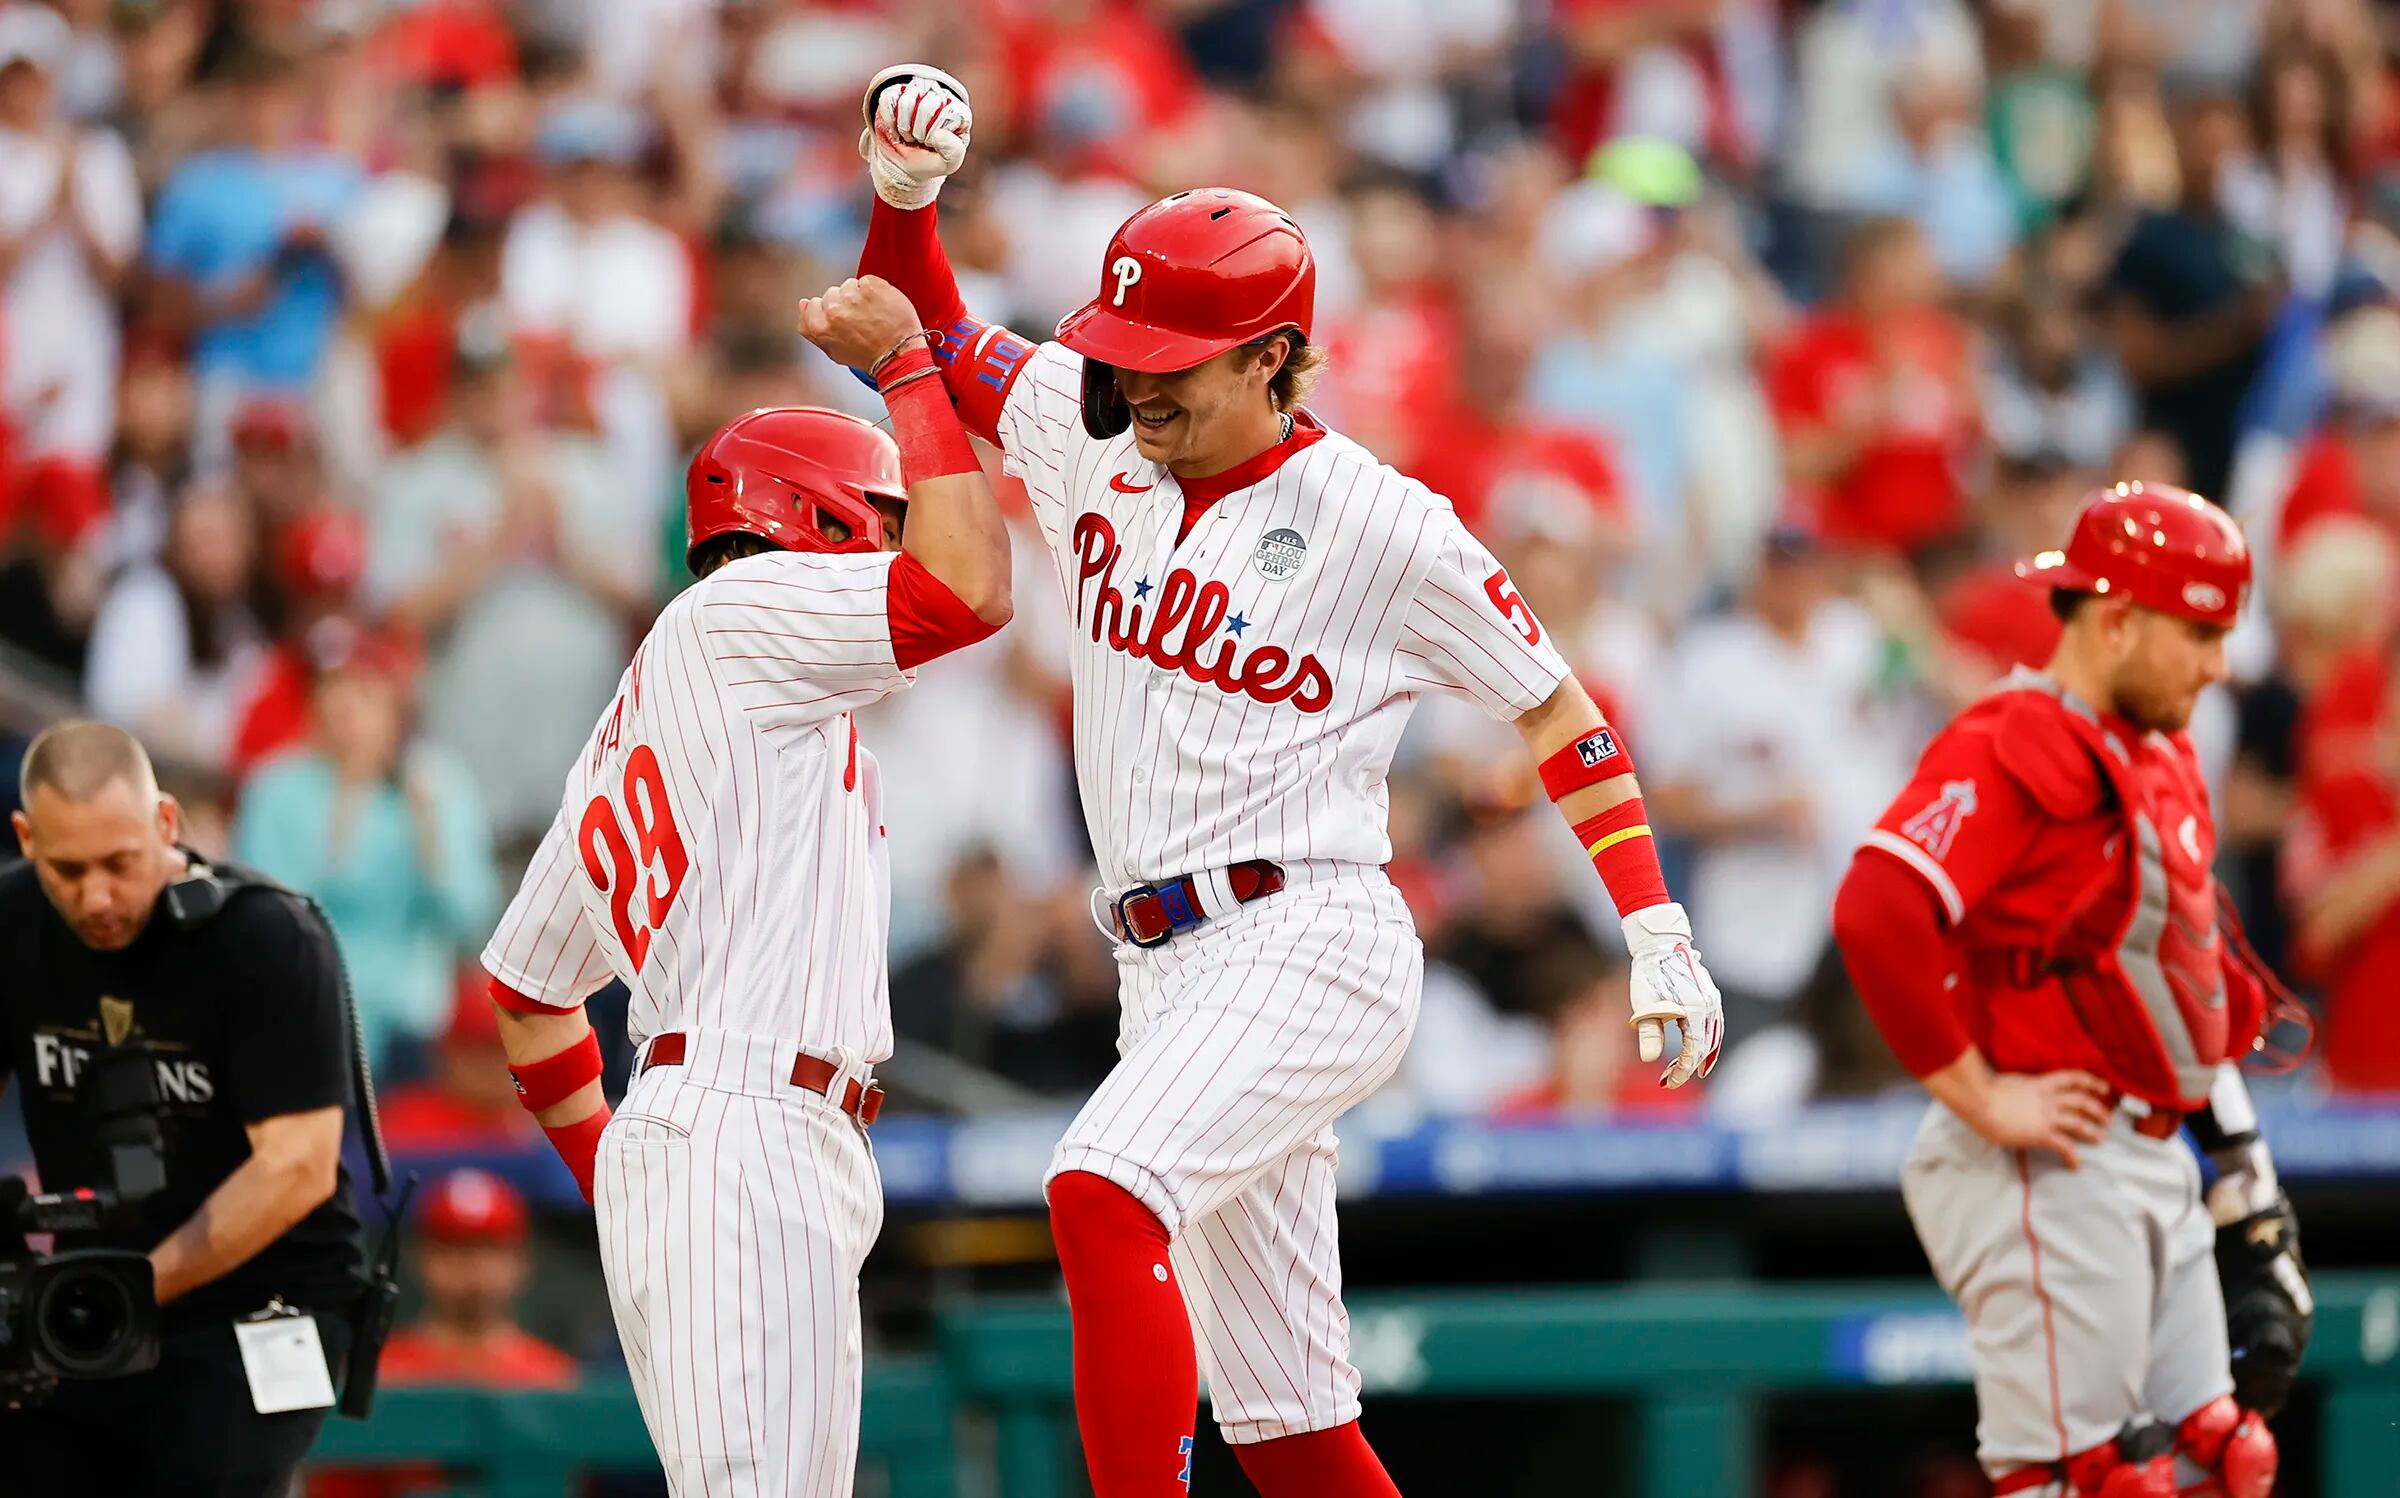 Phillies win Game 1 in 10 after battling back from 5-0 deficit